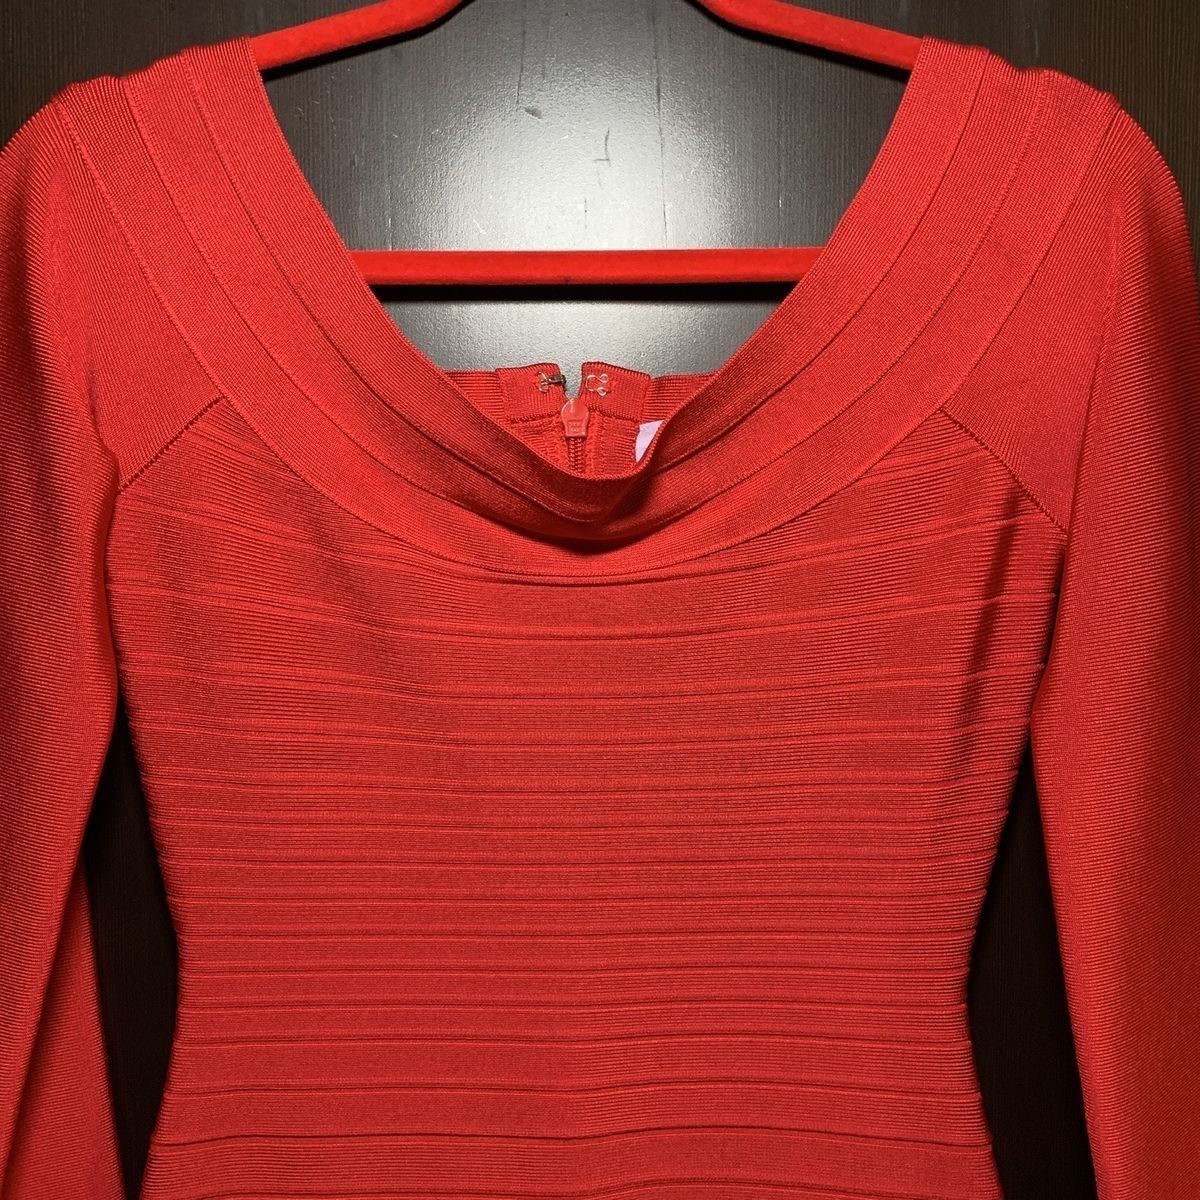 Herve Leger Size 4 Nightclub Long Sleeve Red Cocktail Dress on Queenly